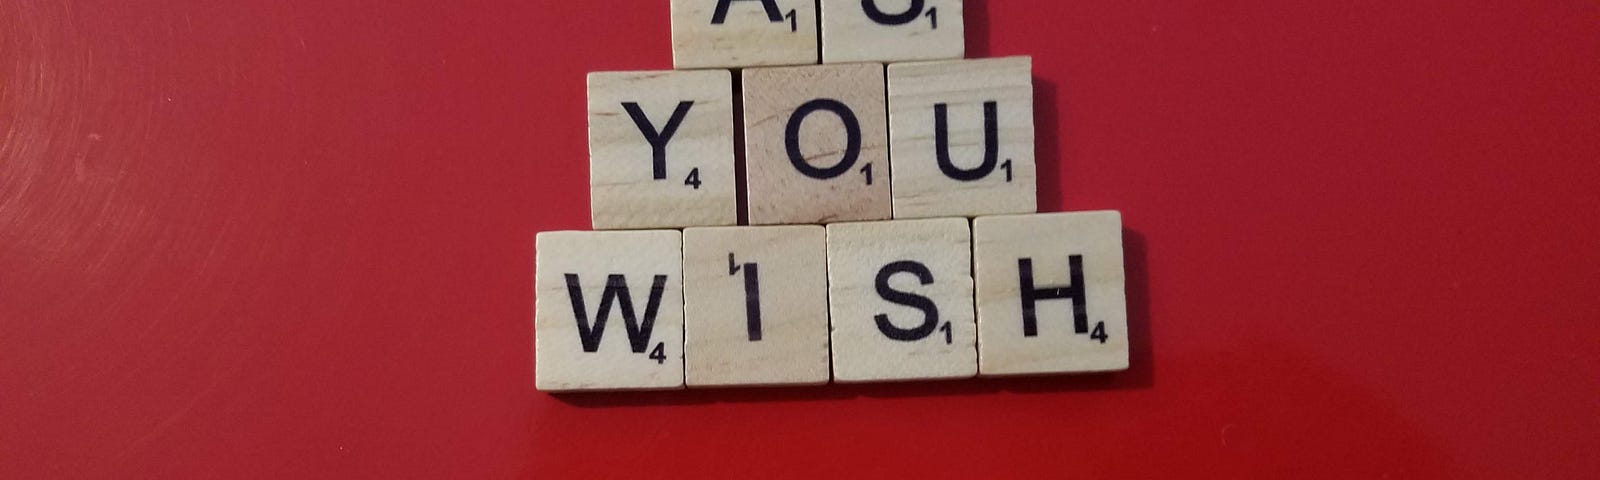 Wooden and plastic tiles spelling out “As you wish 37”